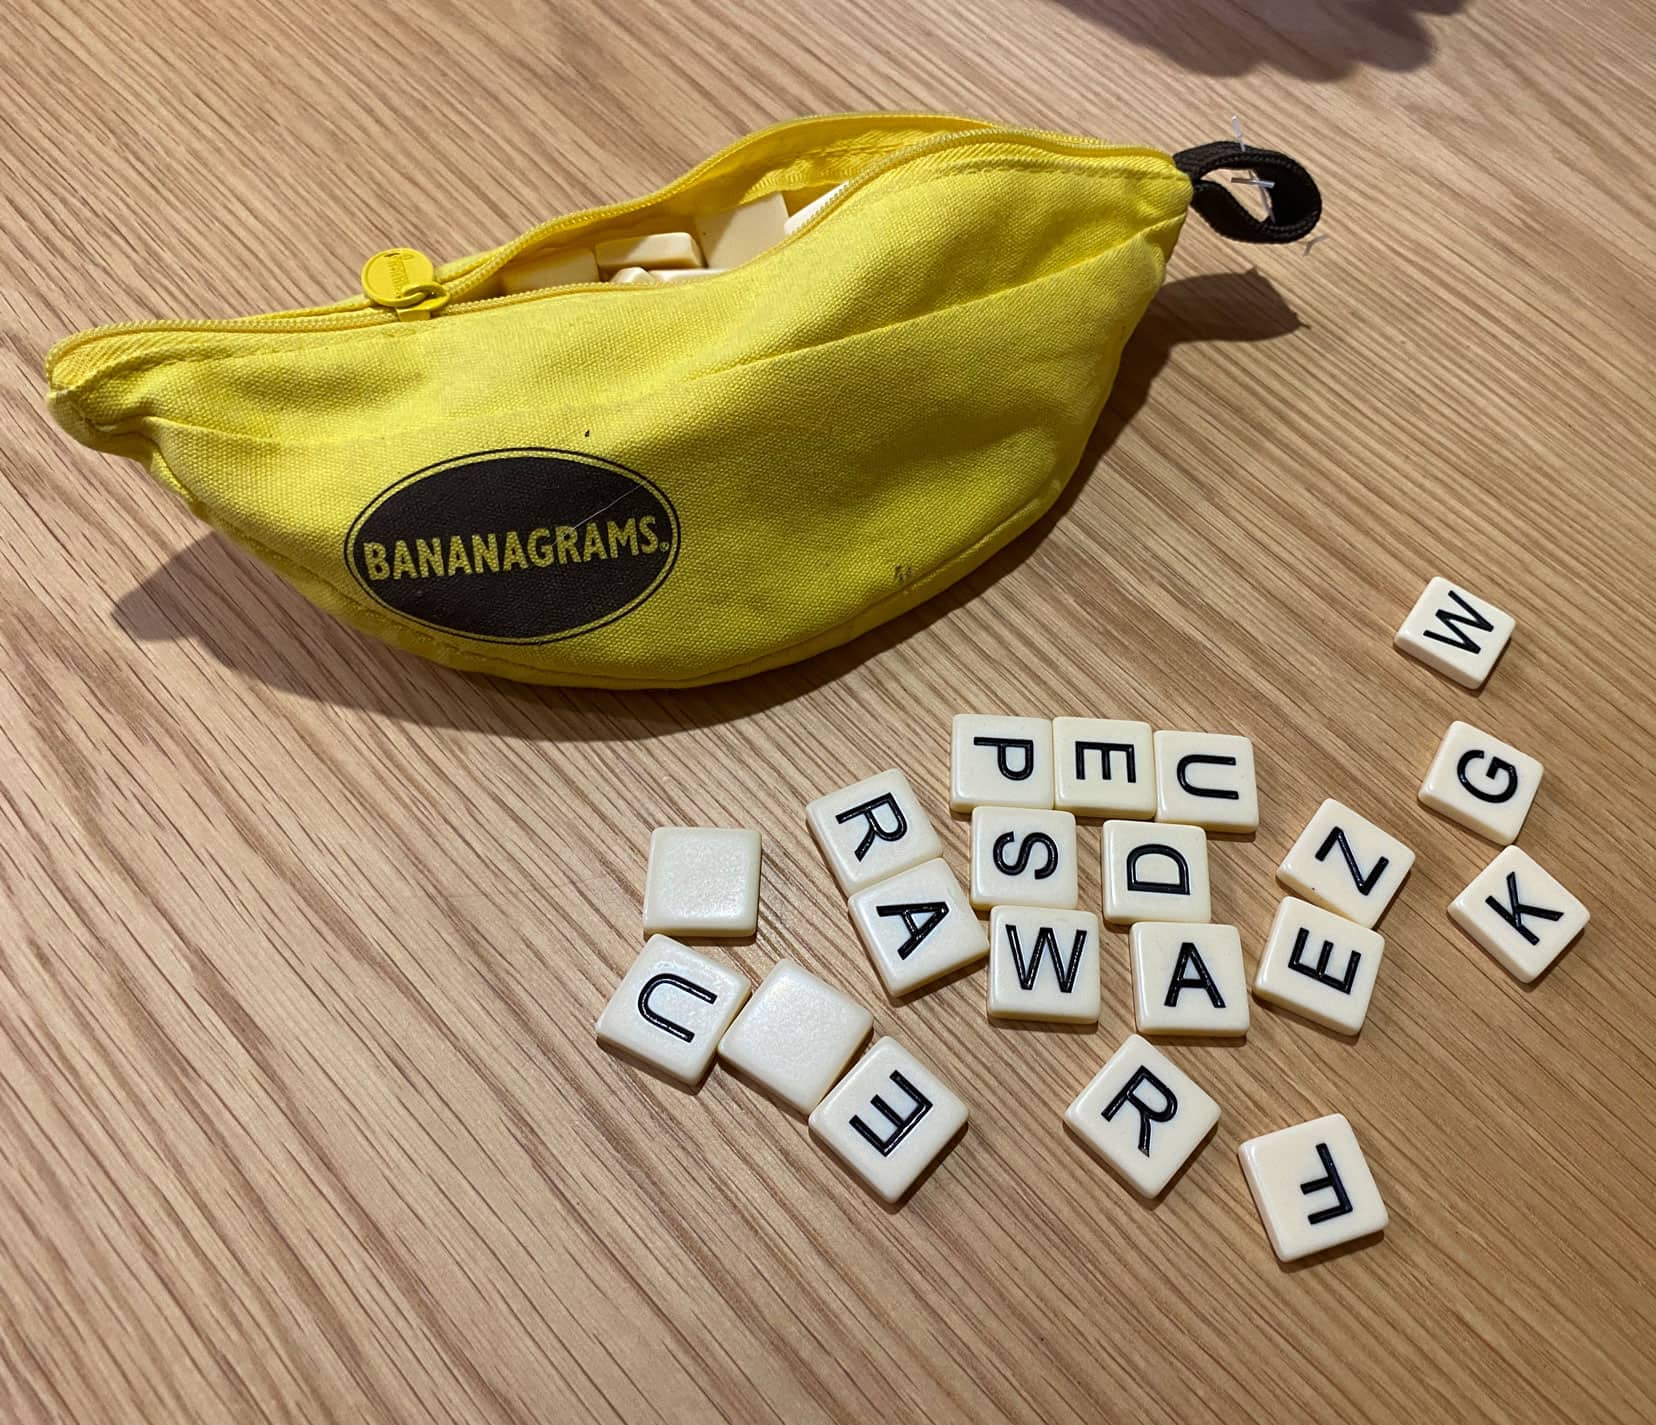 Bananagrams yellow banana shaped case with word tiles inside and a few scattered outside